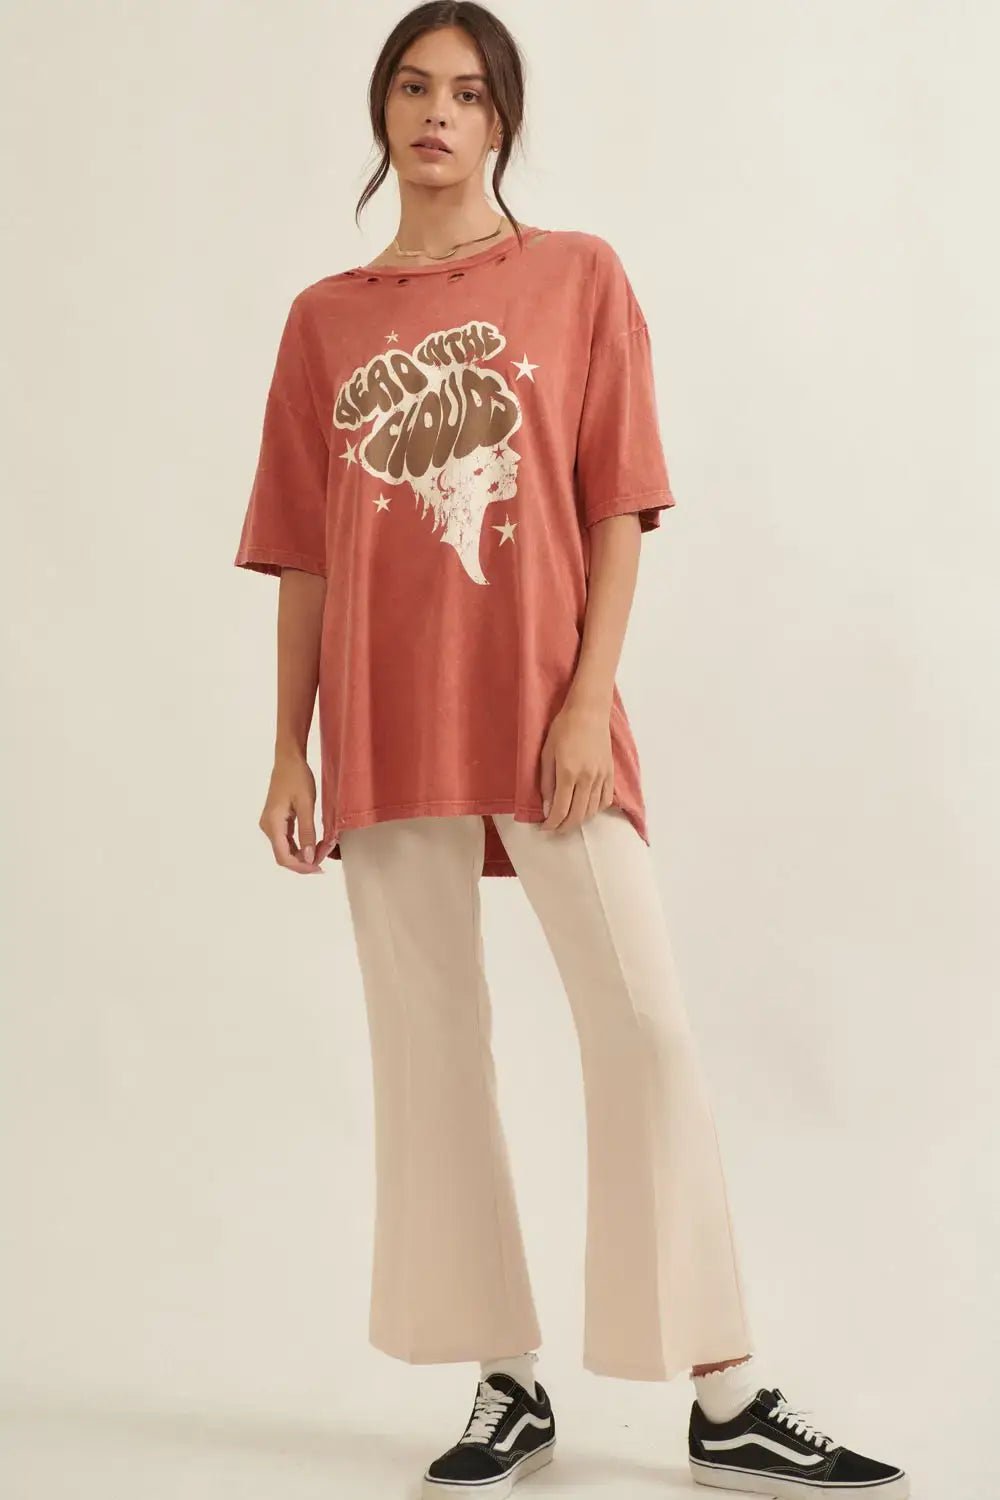 Head in the Clouds Mineral Wash Graphic Top - Graphic Tee